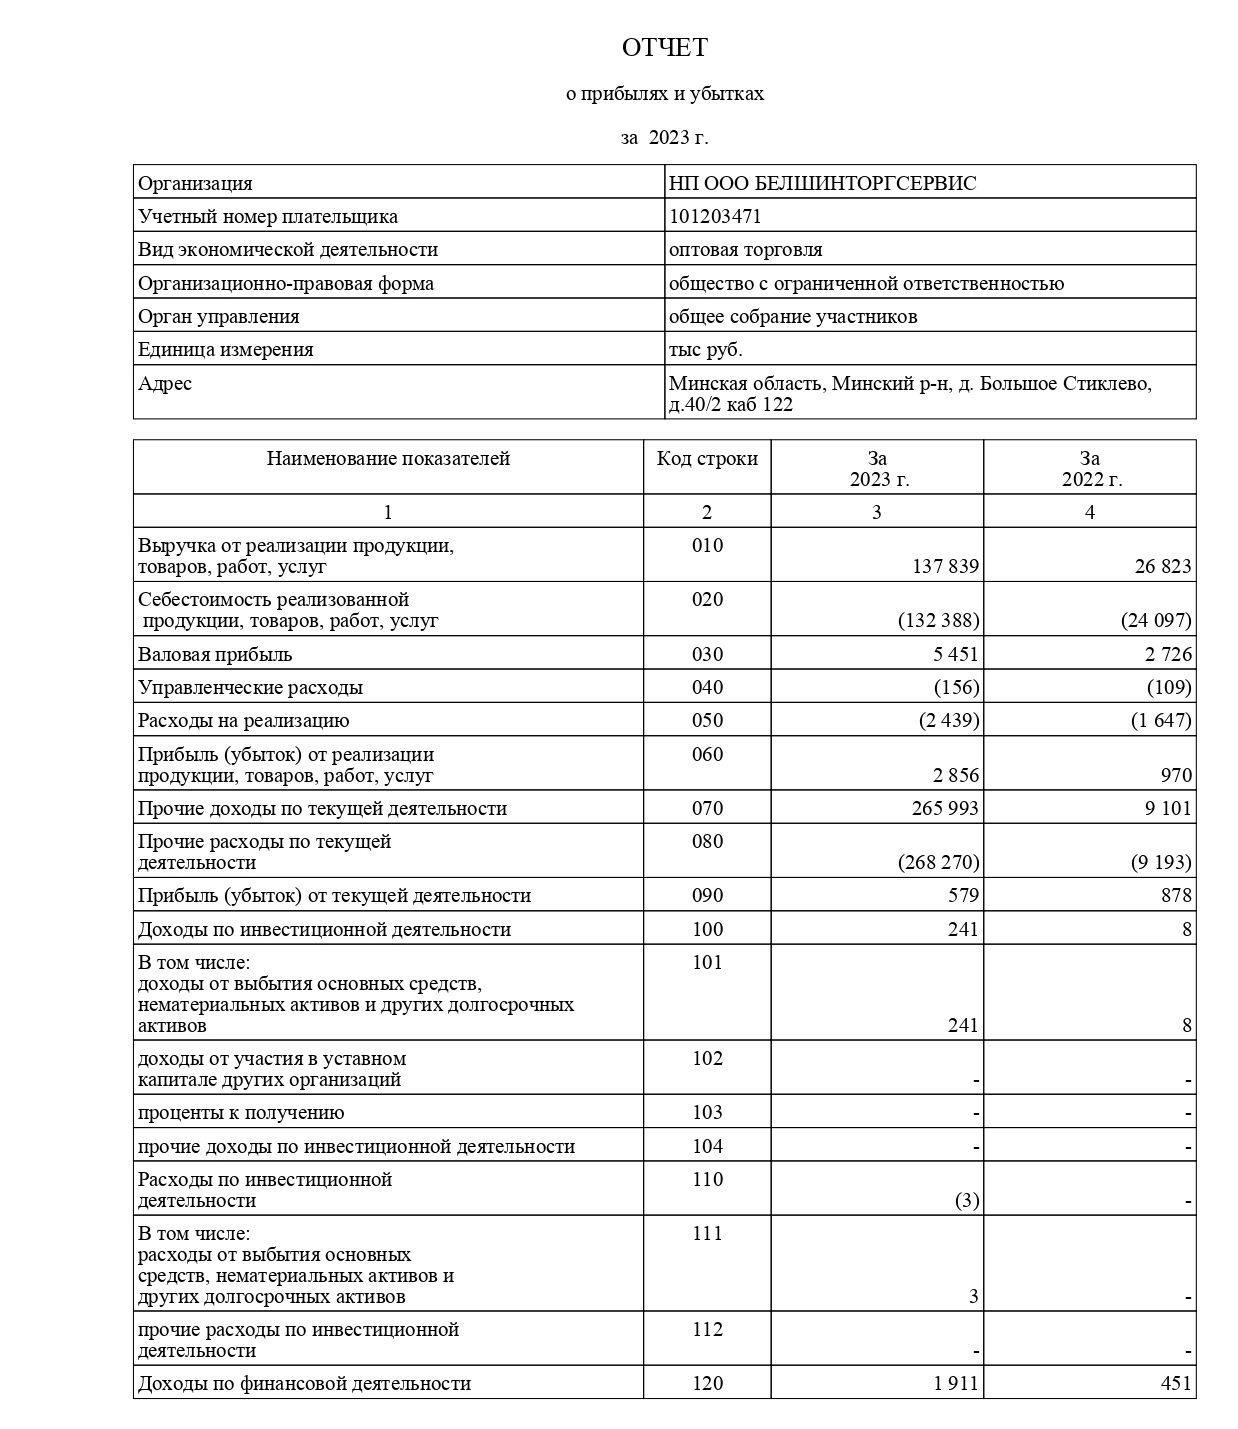 PROFIT AND LOSS STATEMENT FOR NPOOO BELSHINTORGSERVIS_1